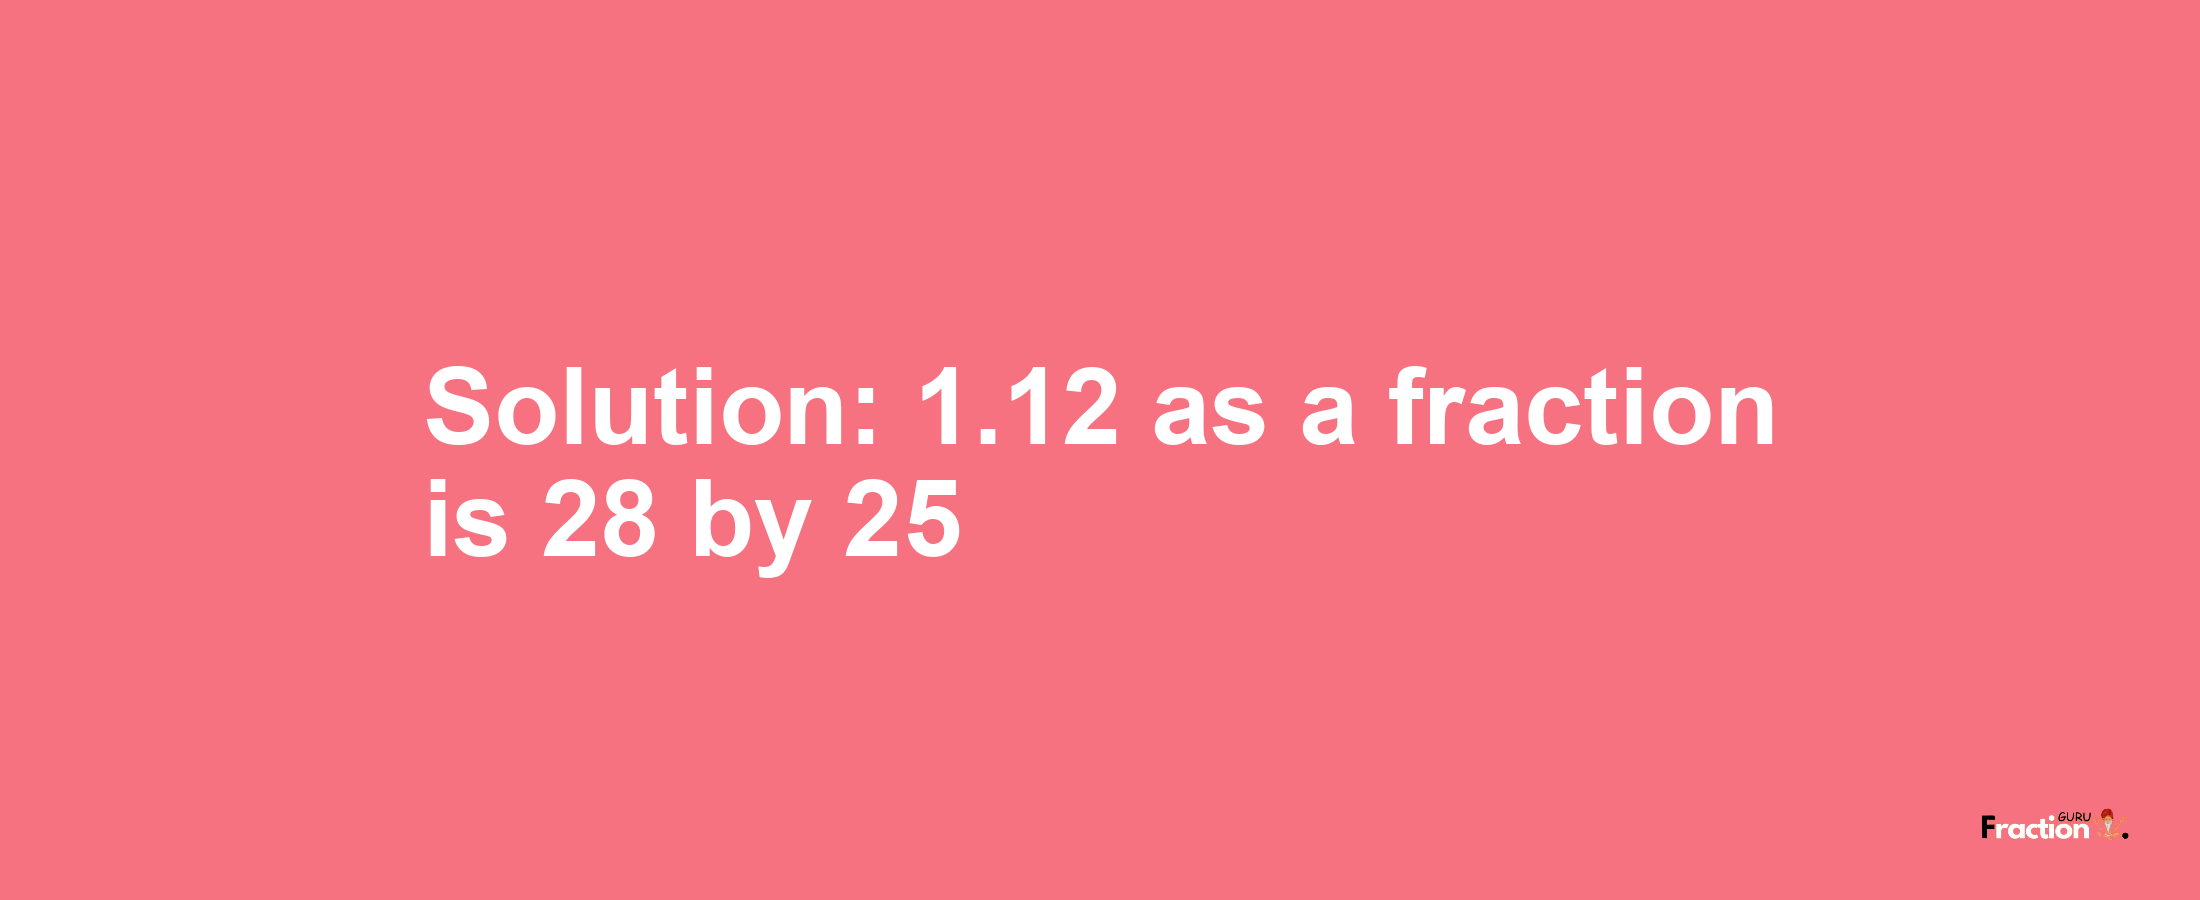 Solution:1.12 as a fraction is 28/25